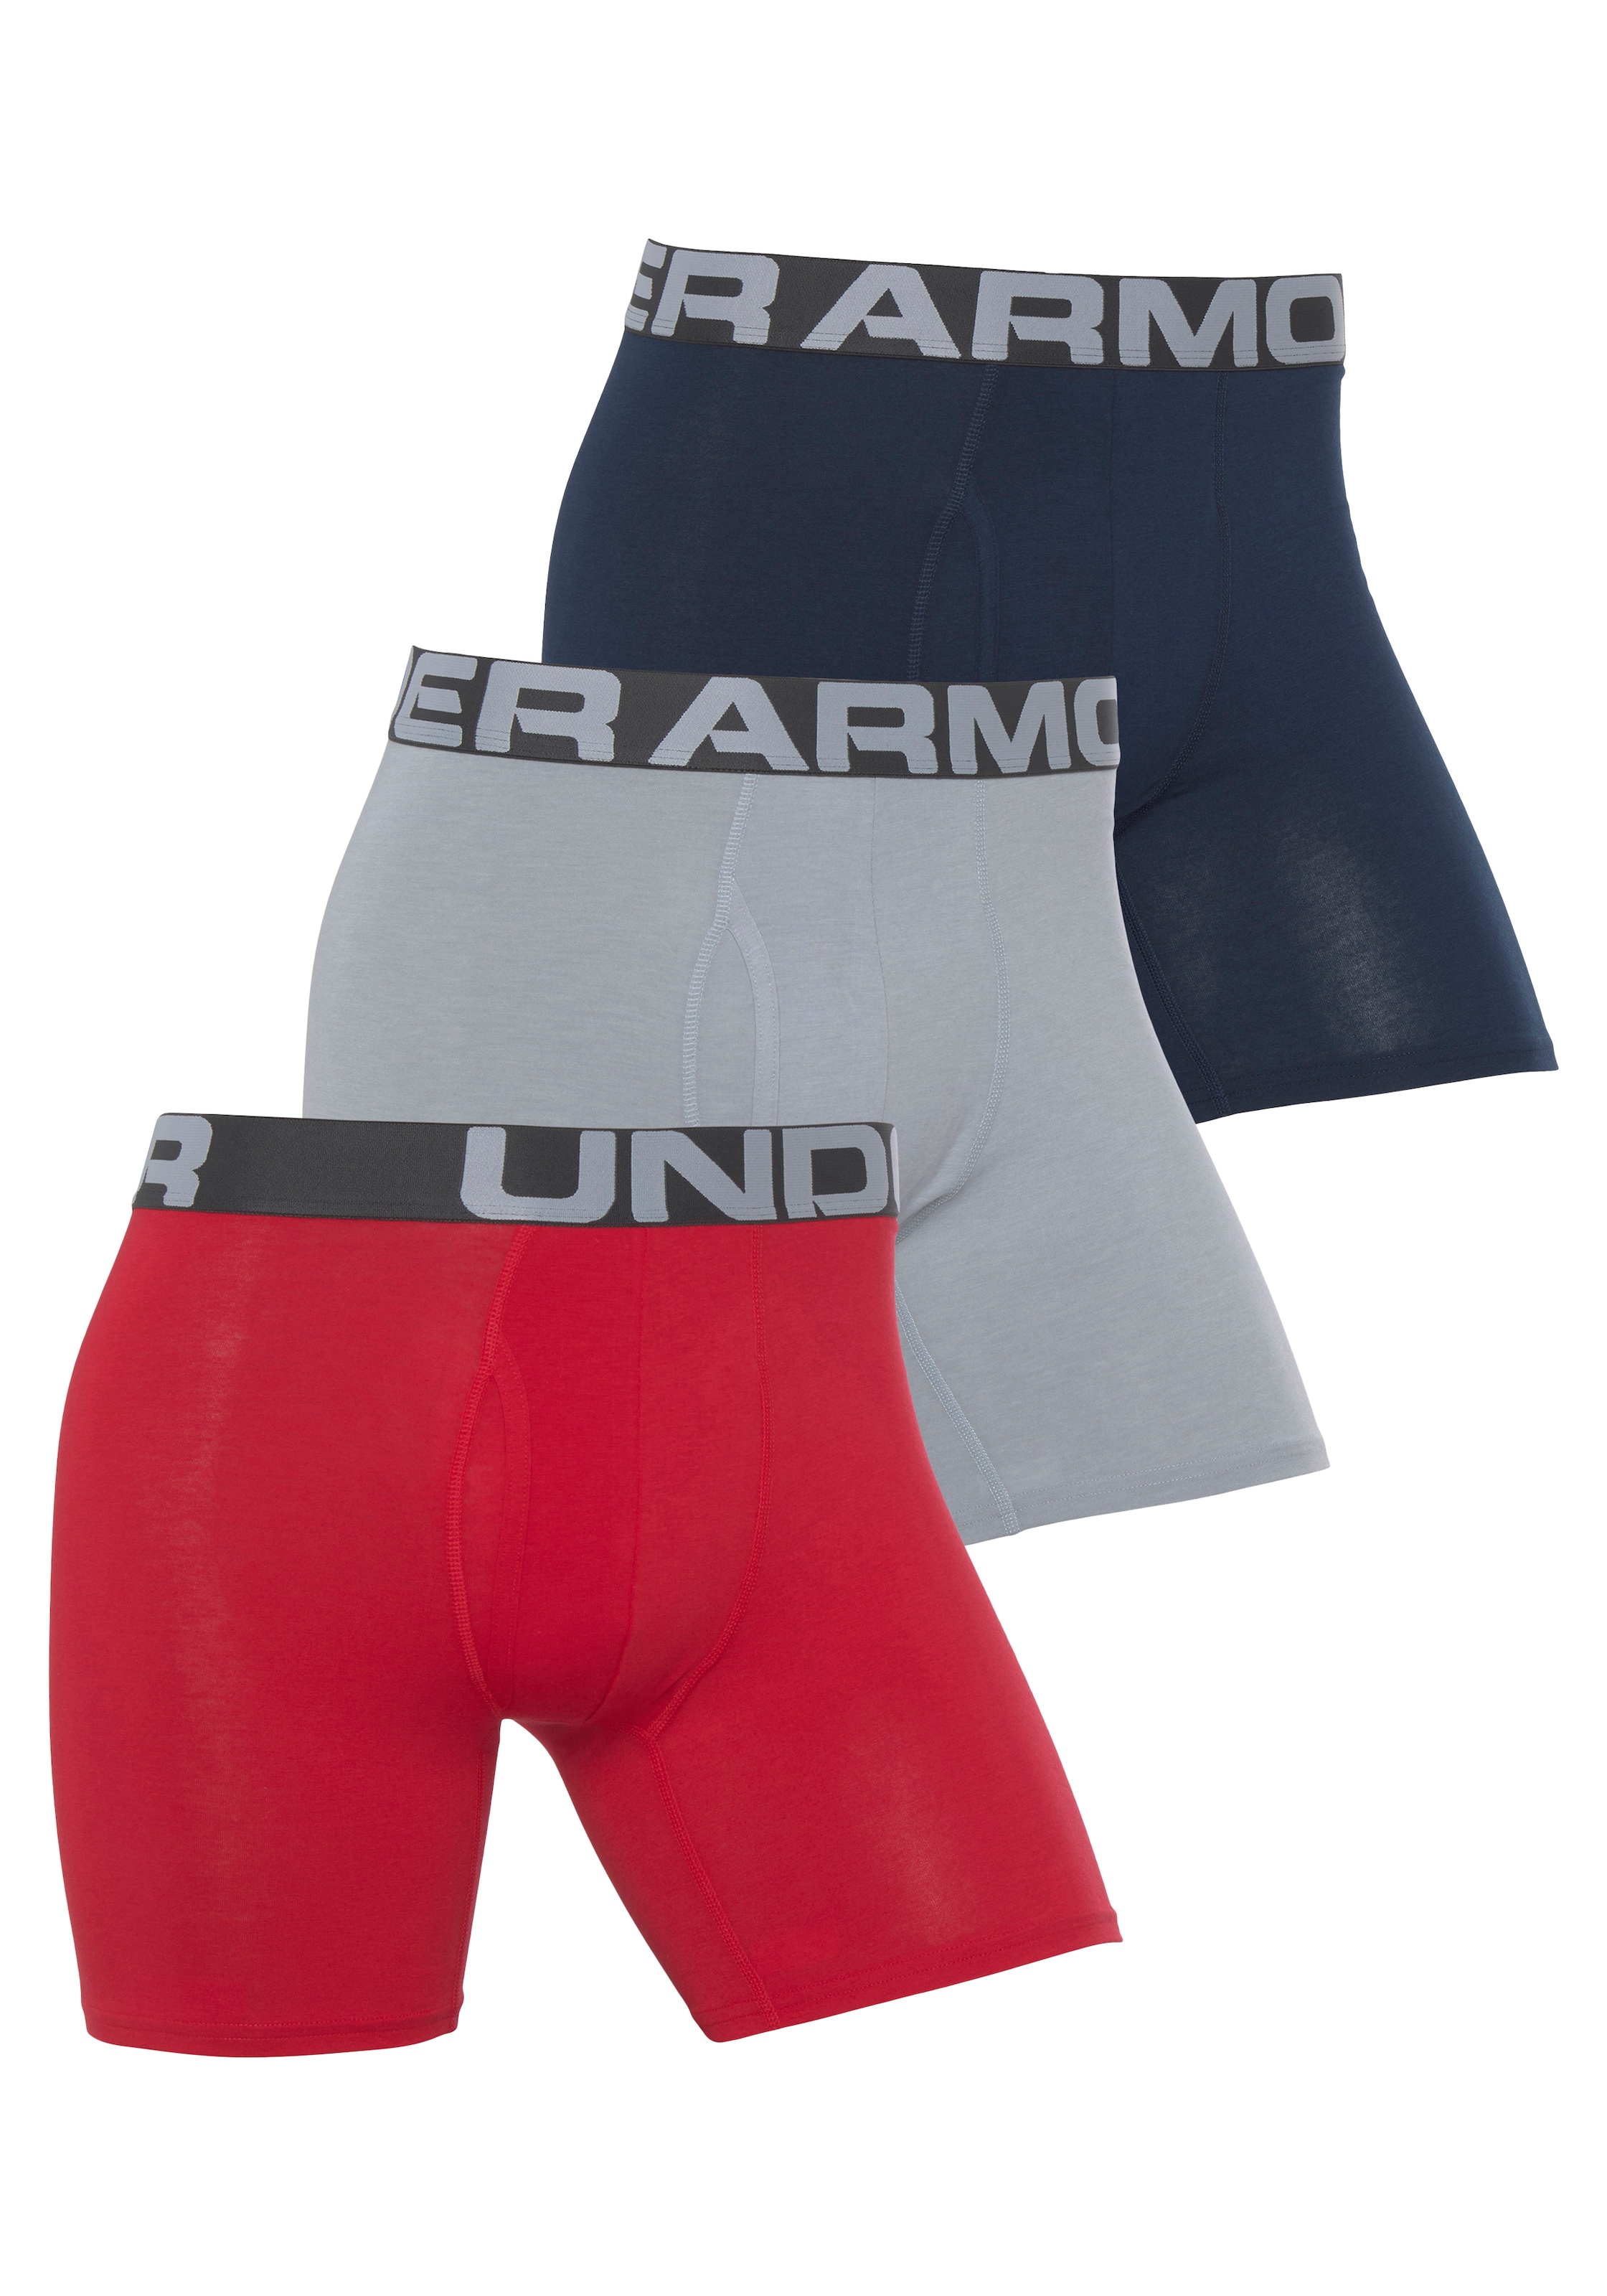 Under Armour® OTTO 6 online »CHARGED in PACK«, 1 Boxershorts COTTON (Packung, 3er-Pack) St., bestellen bei 3